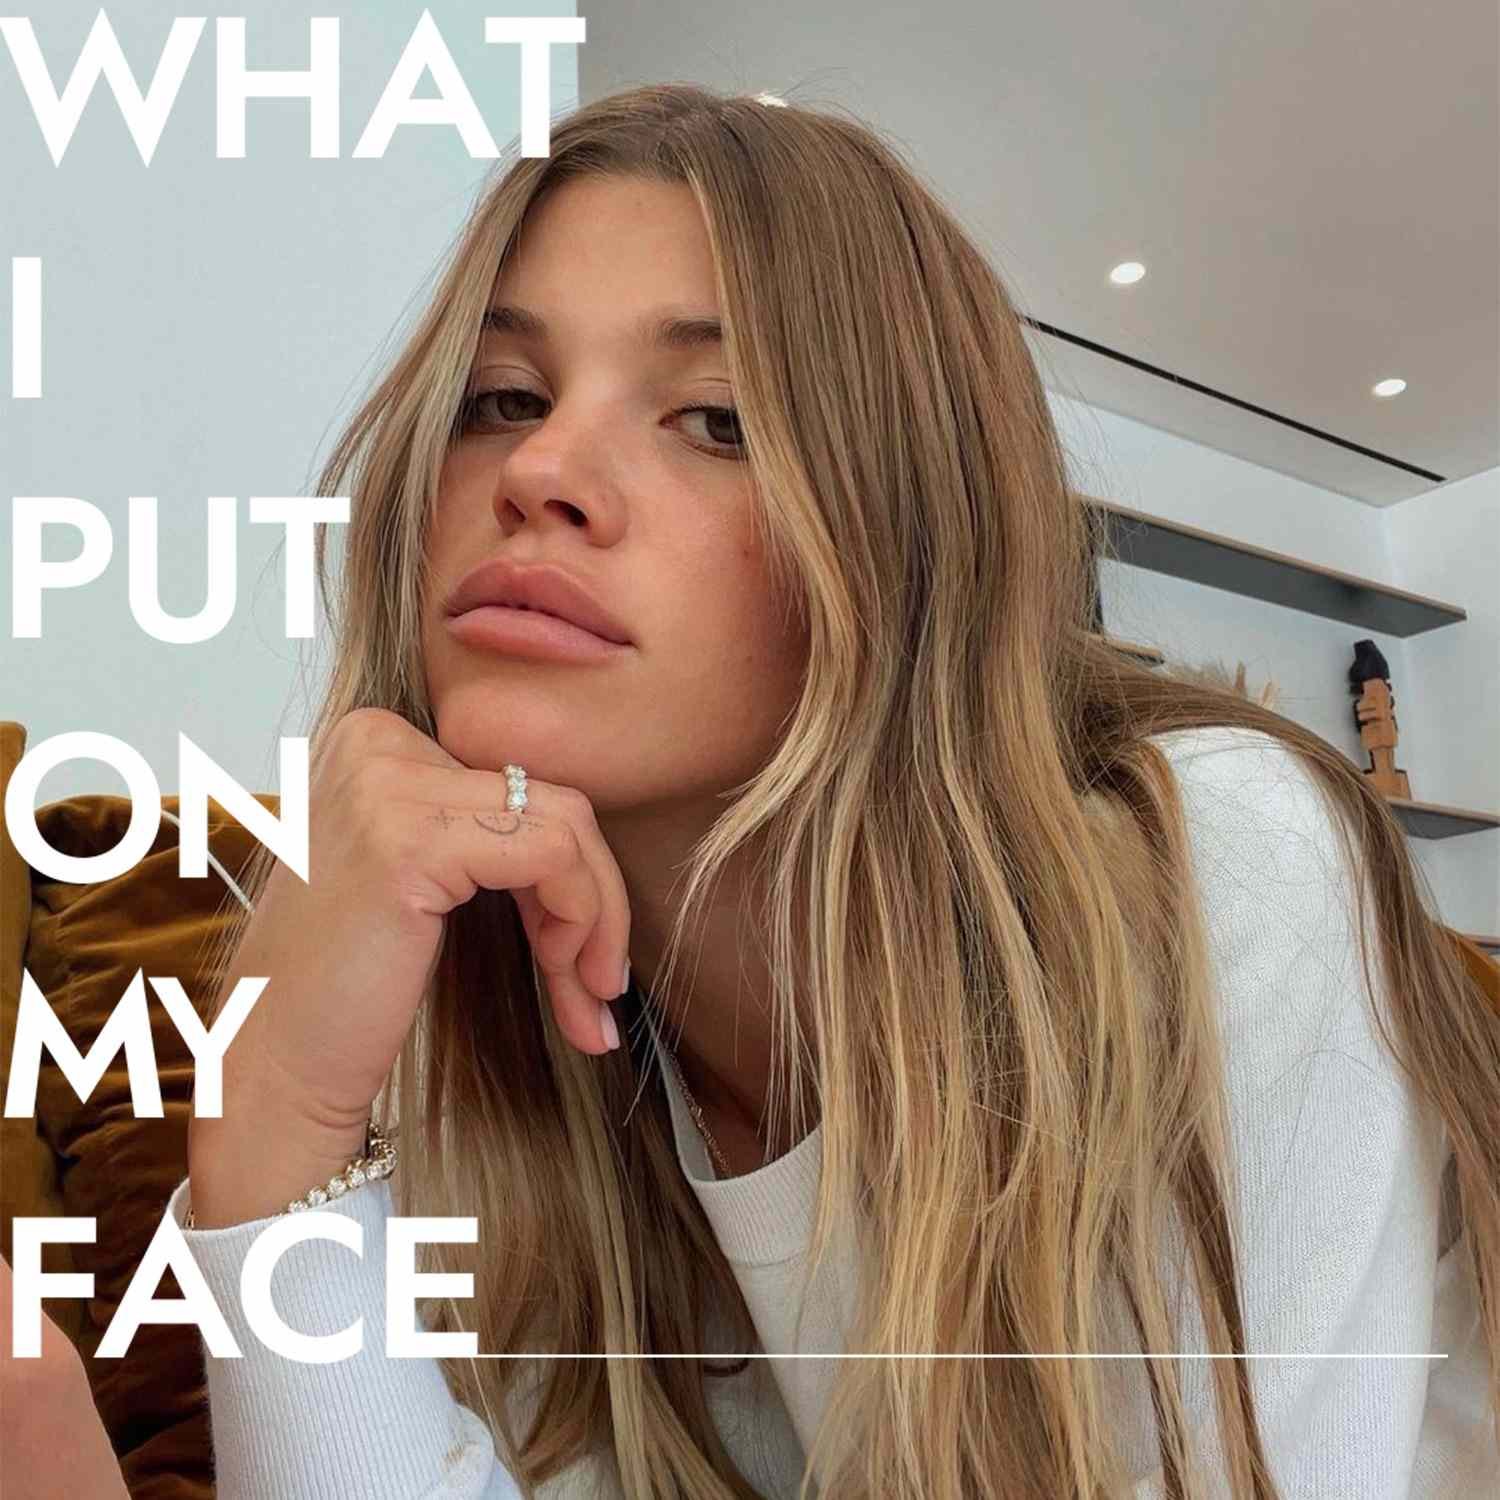 When It Comes to Skincare, Sofia Richie Keeps It Simple